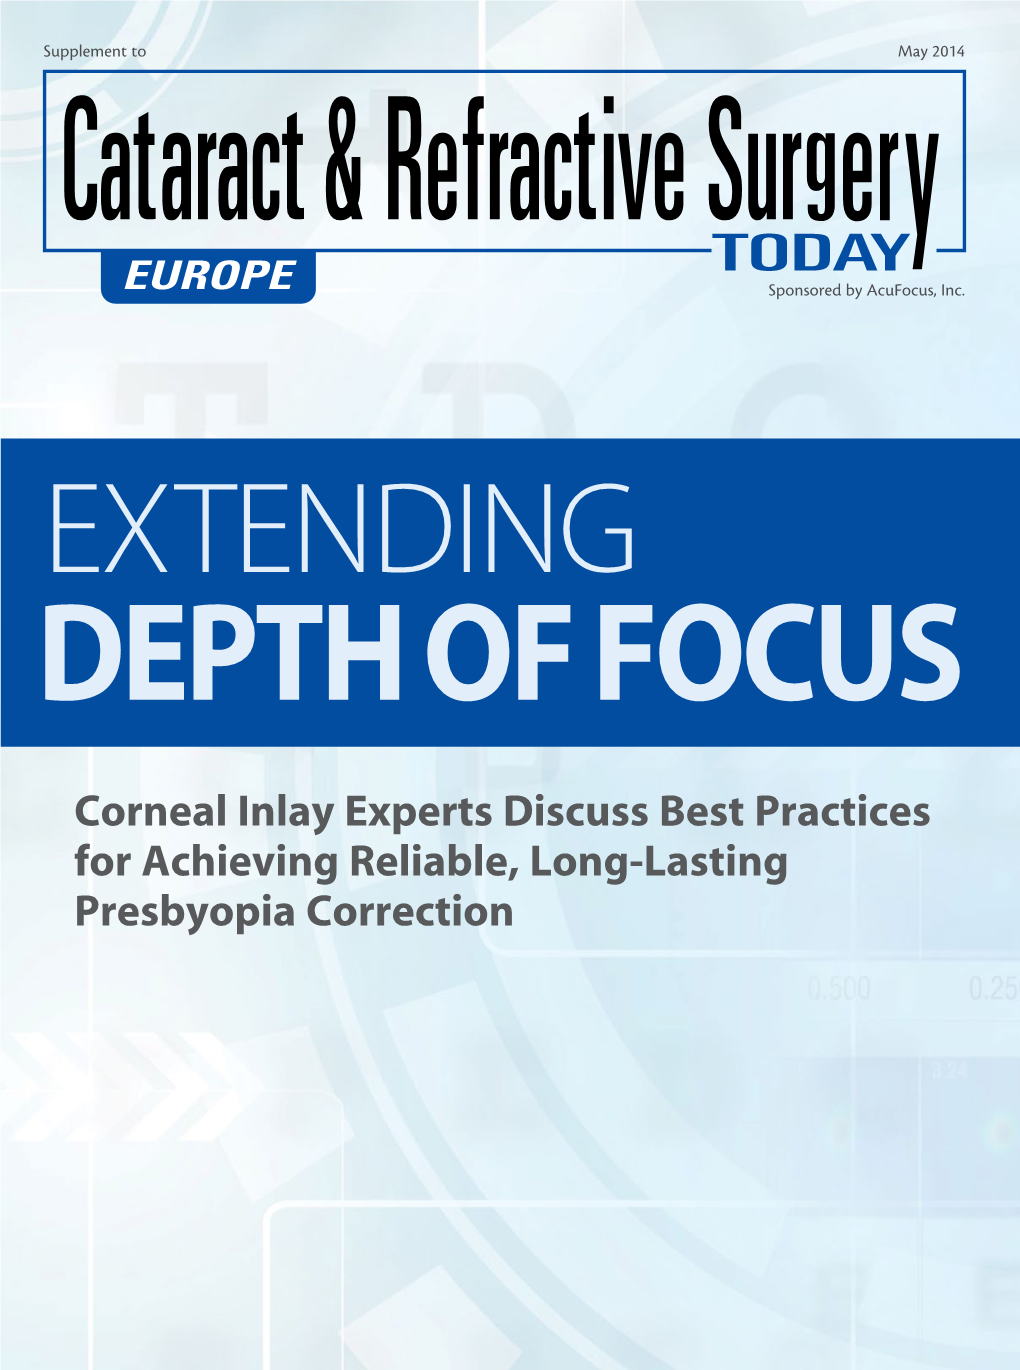 Corneal Inlay Experts Discuss Best Practices for Achieving Reliable